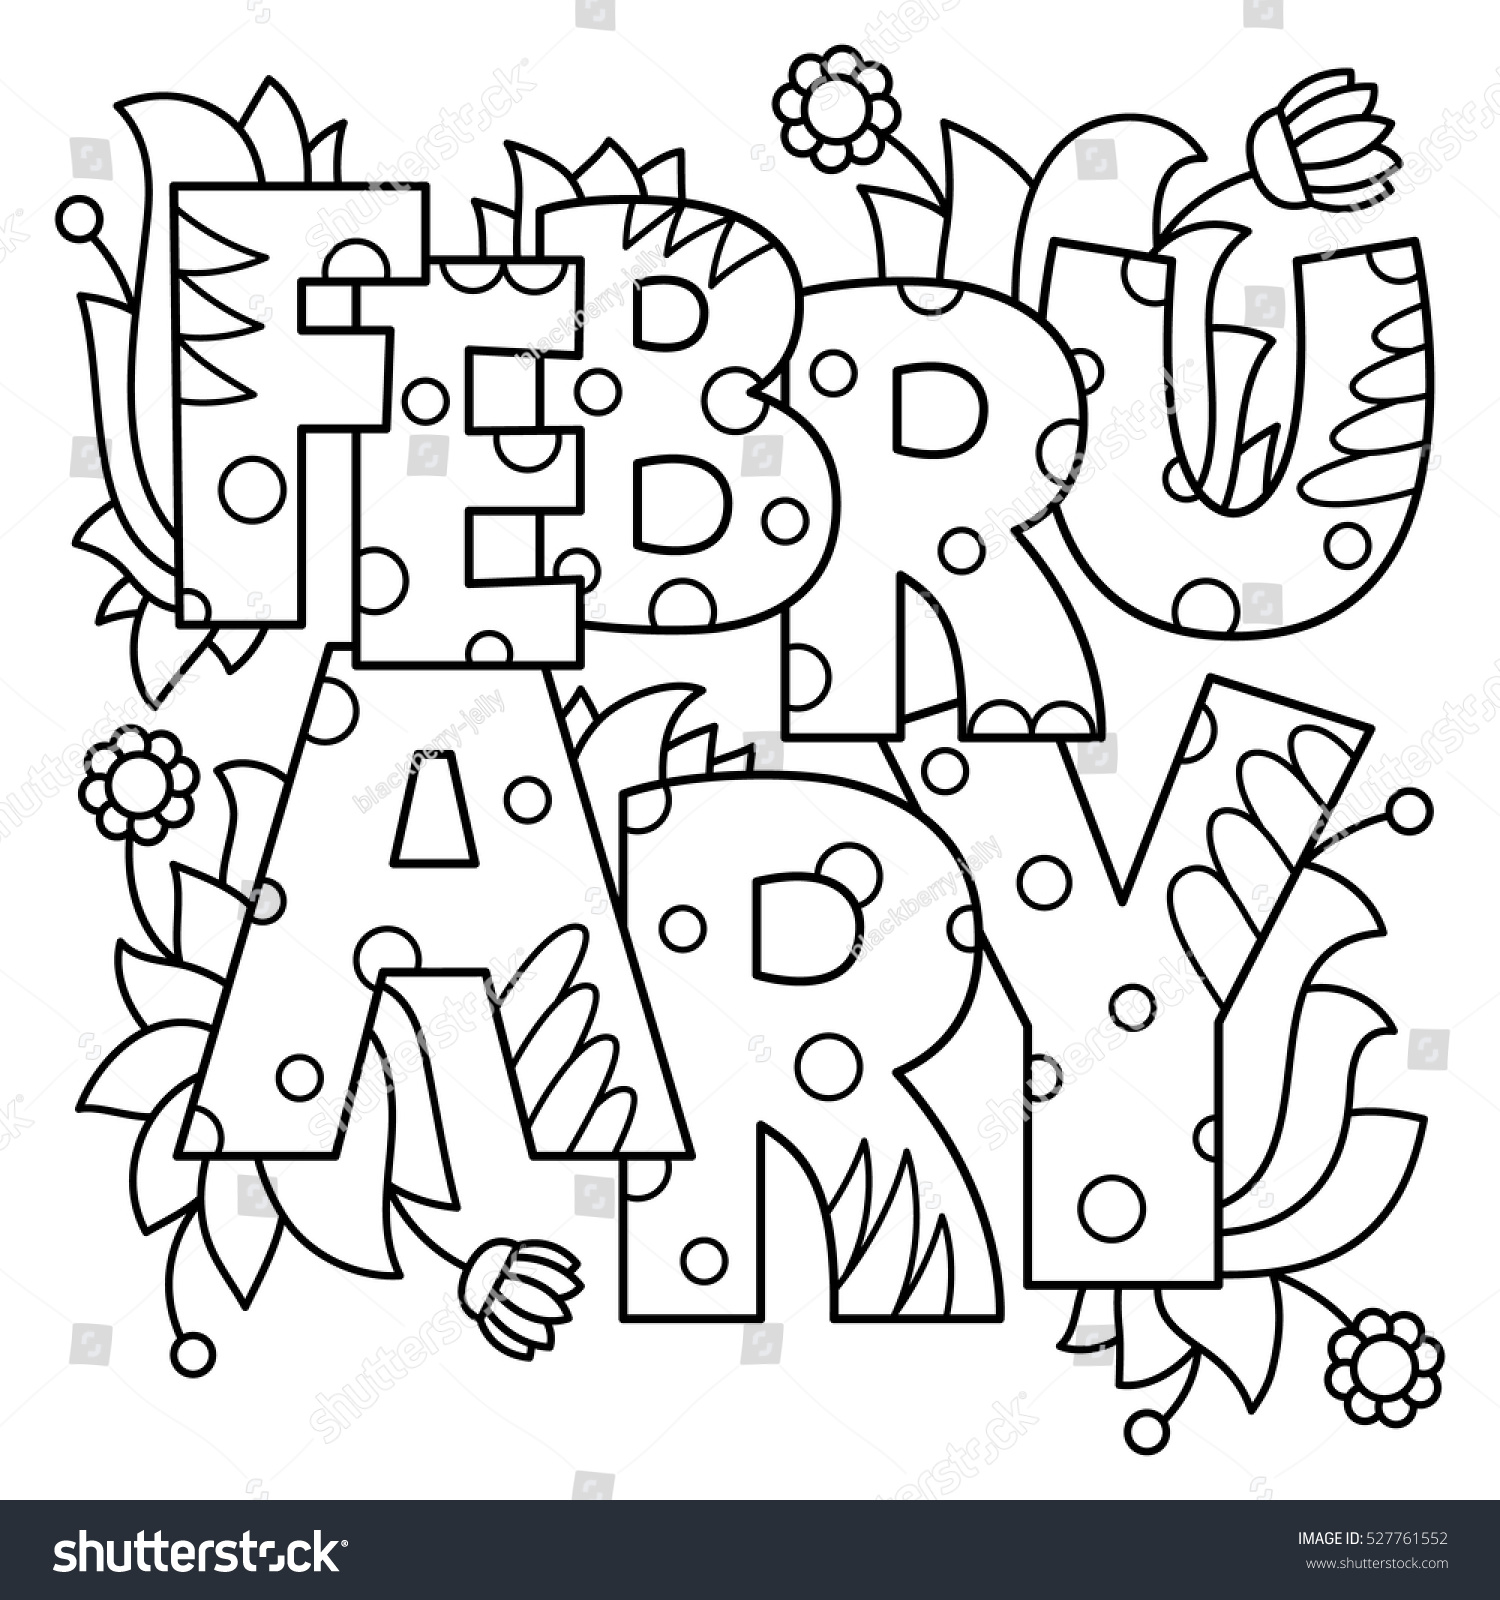 Black white vector illustration february coloring stock vector royalty free